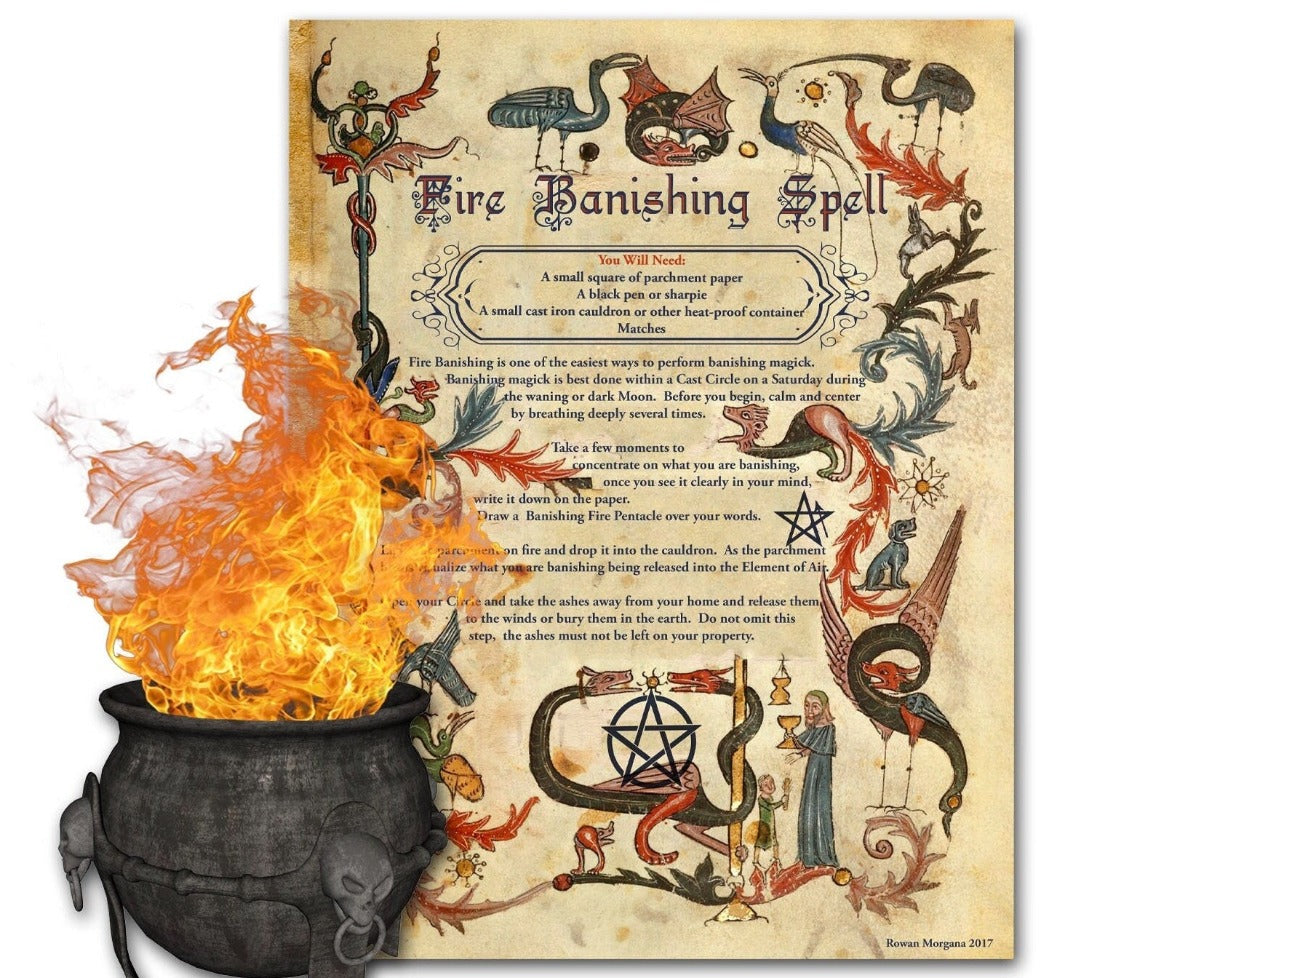 FIRE BANISHING SPELL, Charmed Style Printable, Binding Spell Candle Magic, Fire Element Ritual, Wicca Witchcraft Banish Negative Energy - Morgana Magick Spell